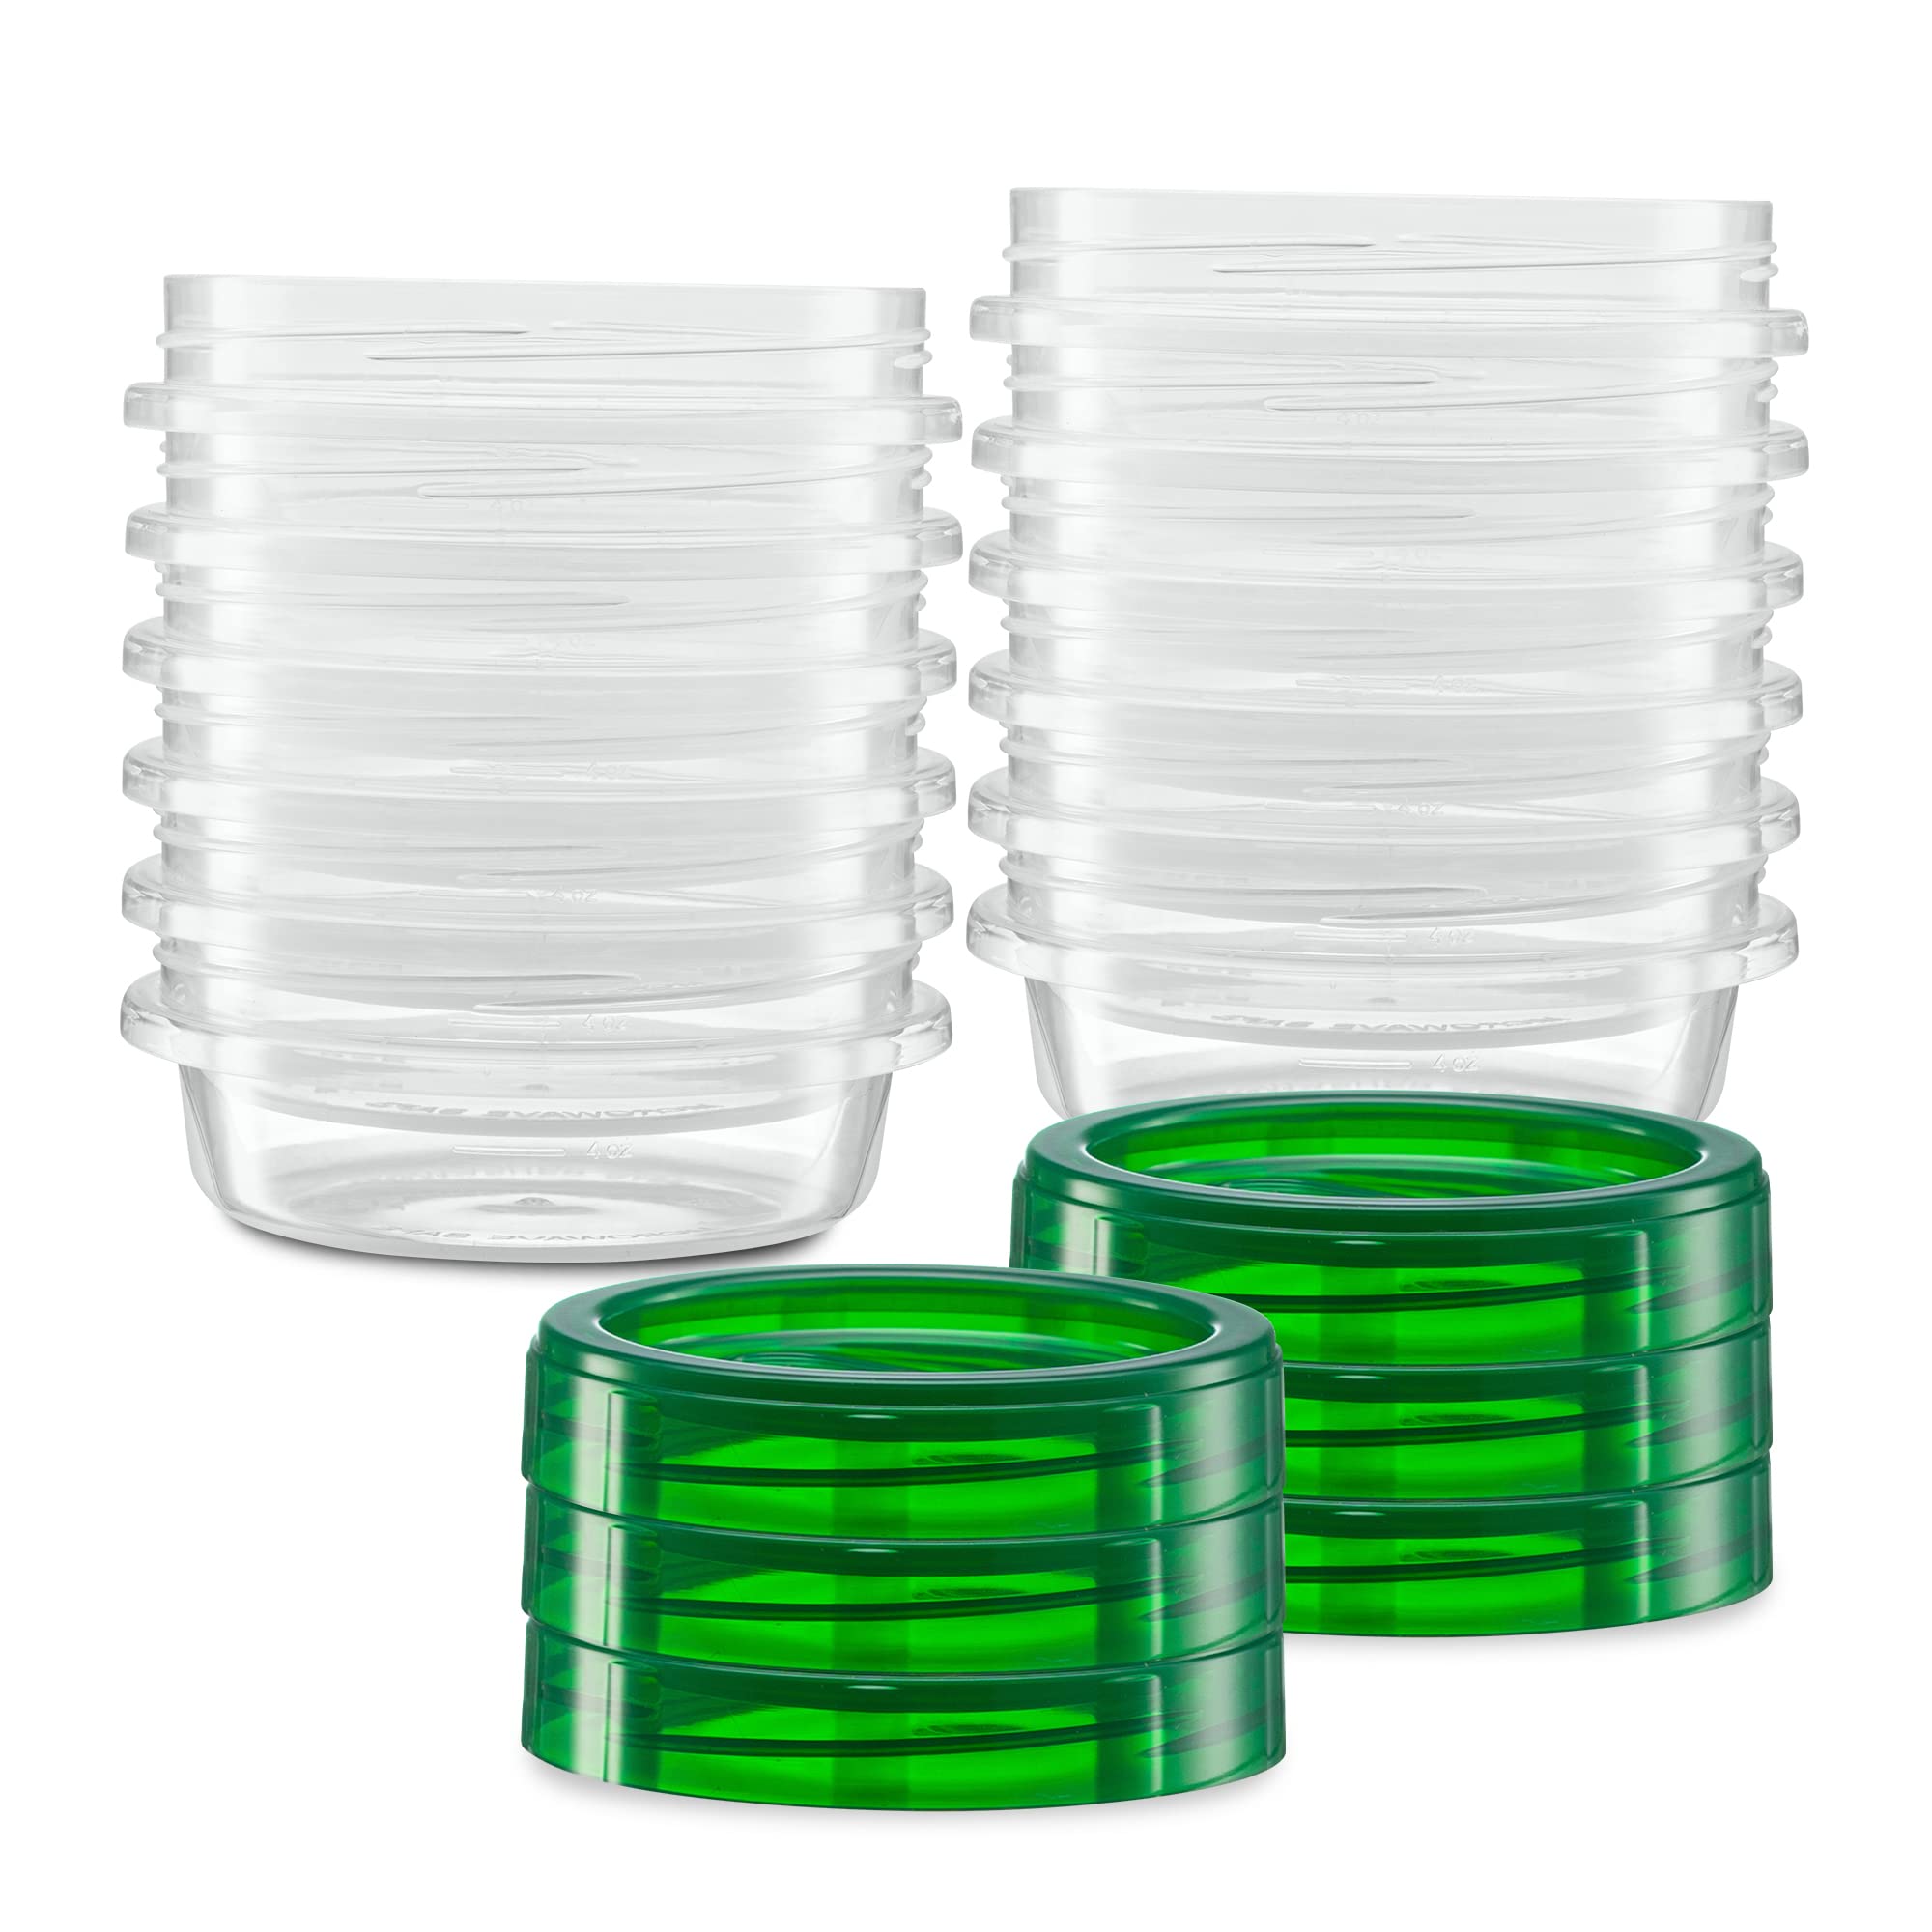 Elegant Disposables (8 Ounce 10 Pack) Twist cap Containers Clear Bottom With Green Top Screw on Lids Twist Top Food Storage Freezer Containers